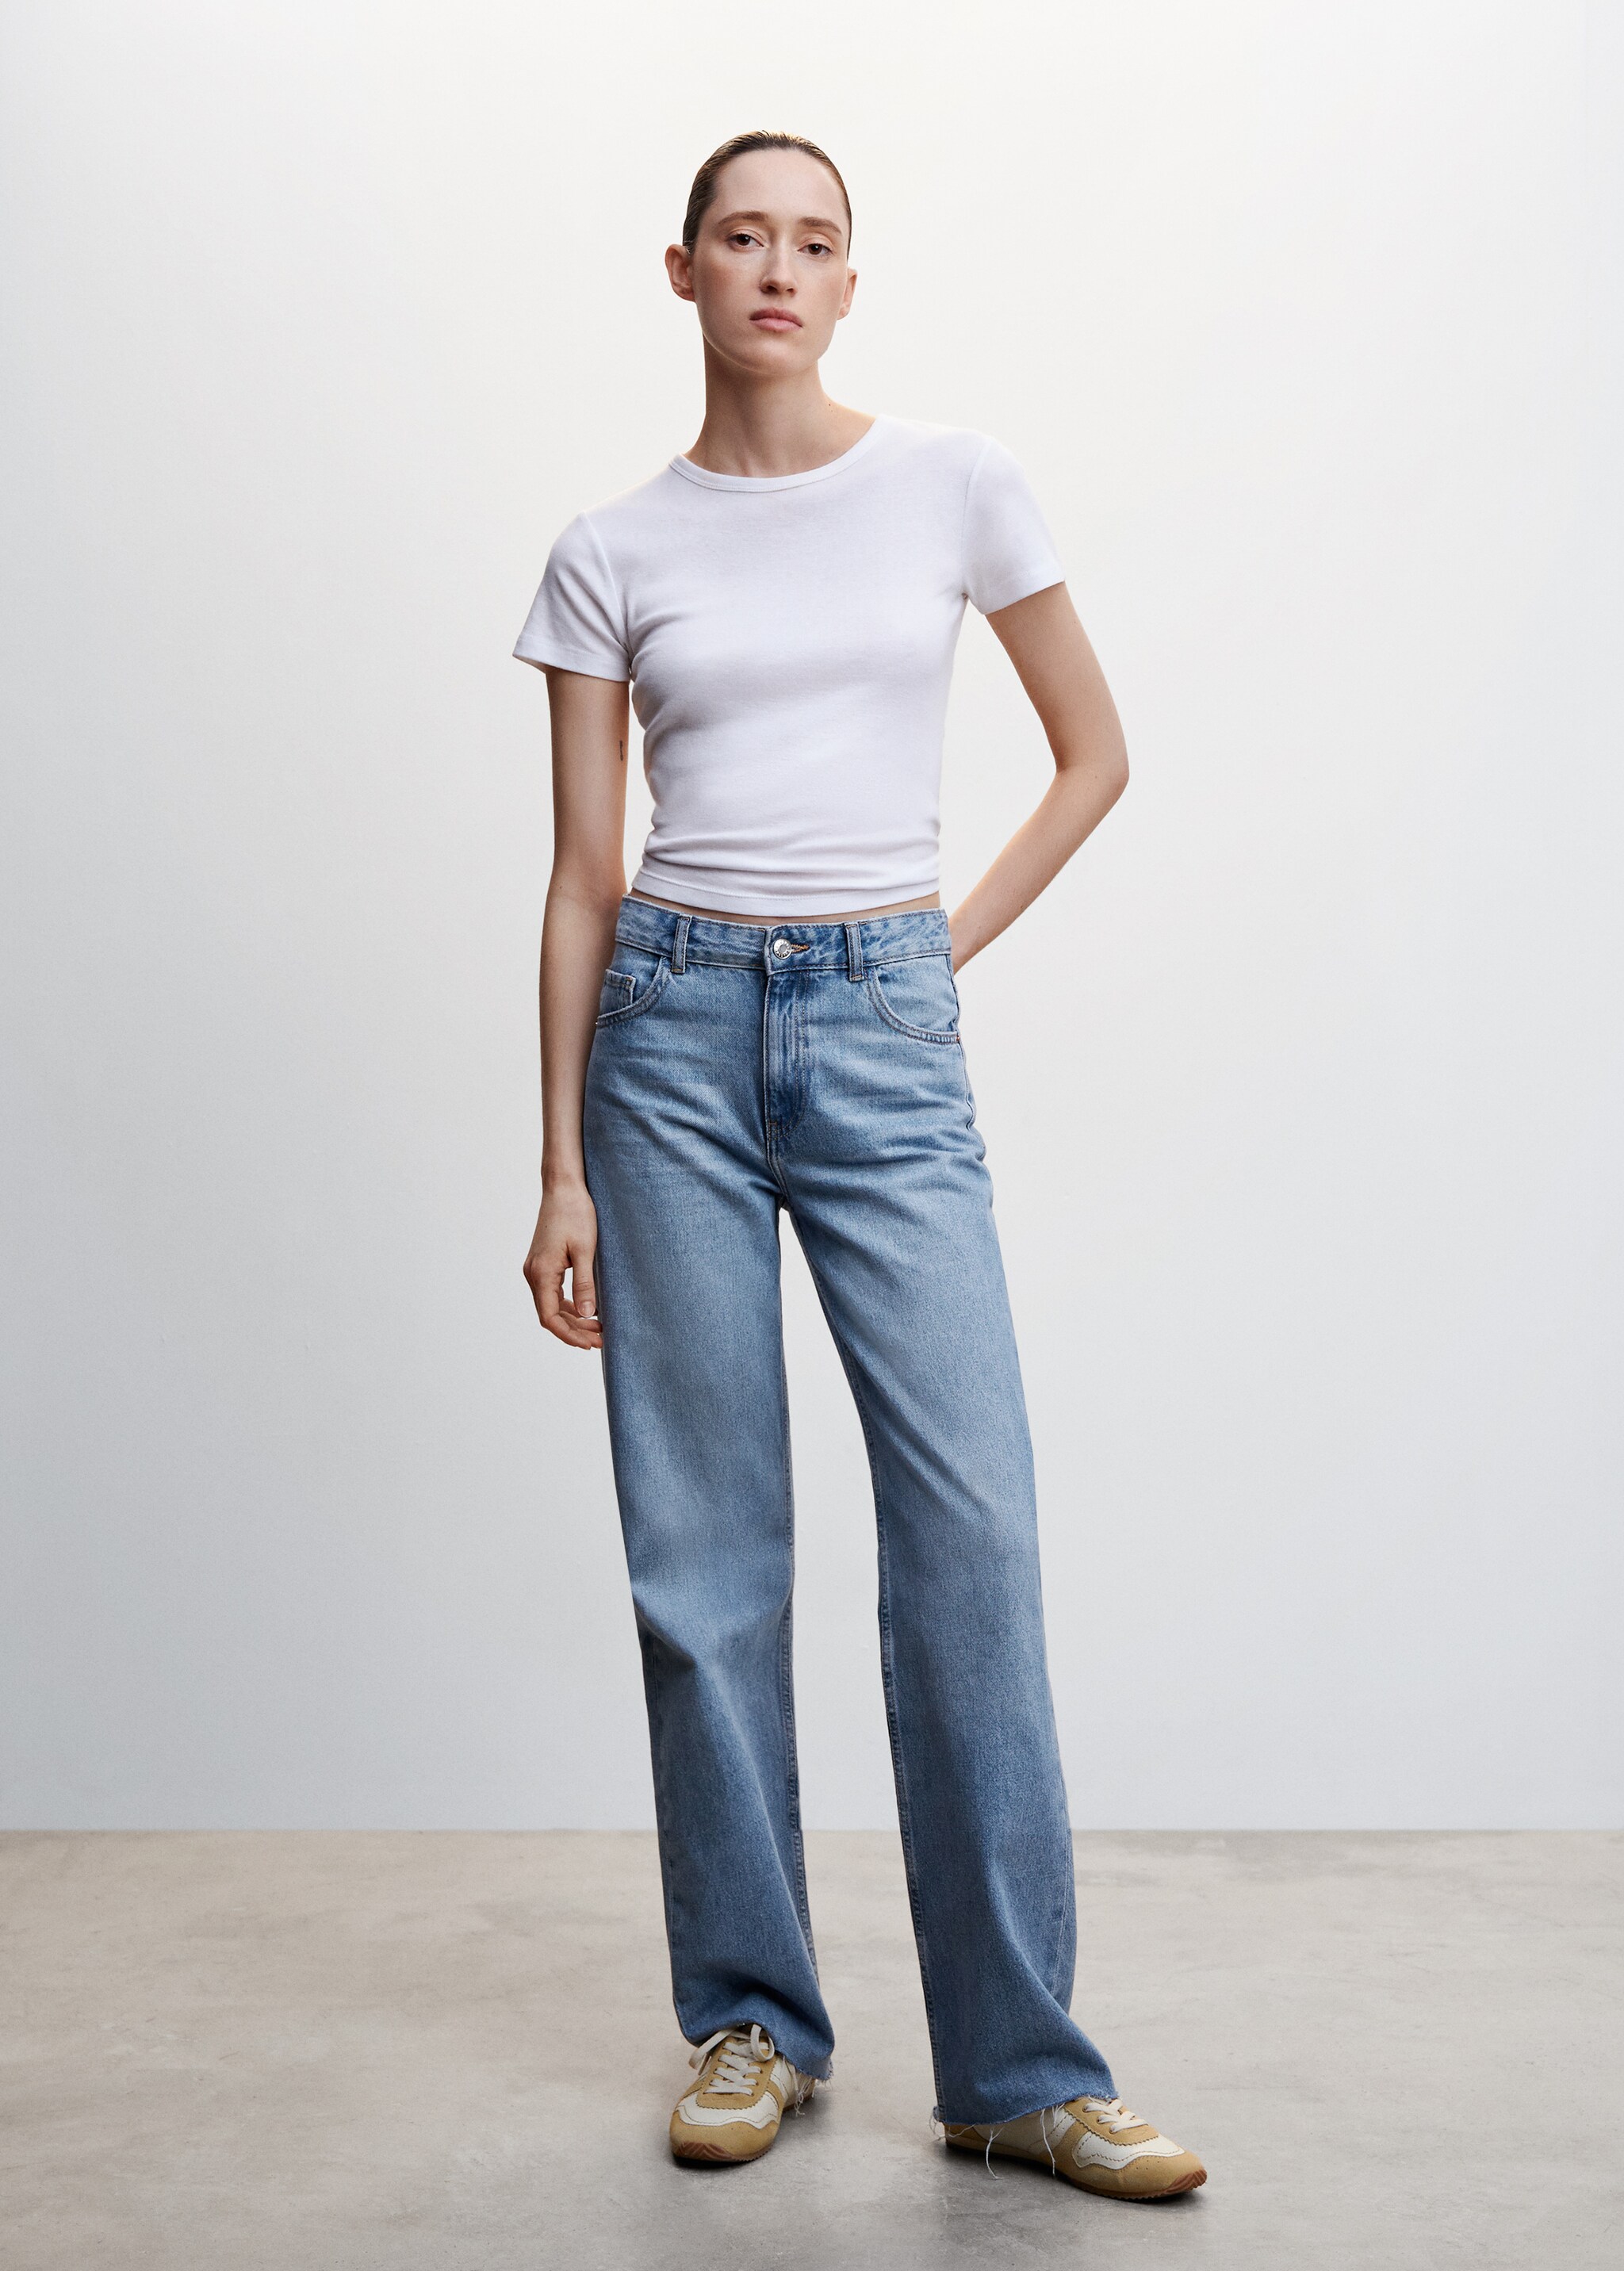 Wideleg mid-rise jeans - General plane